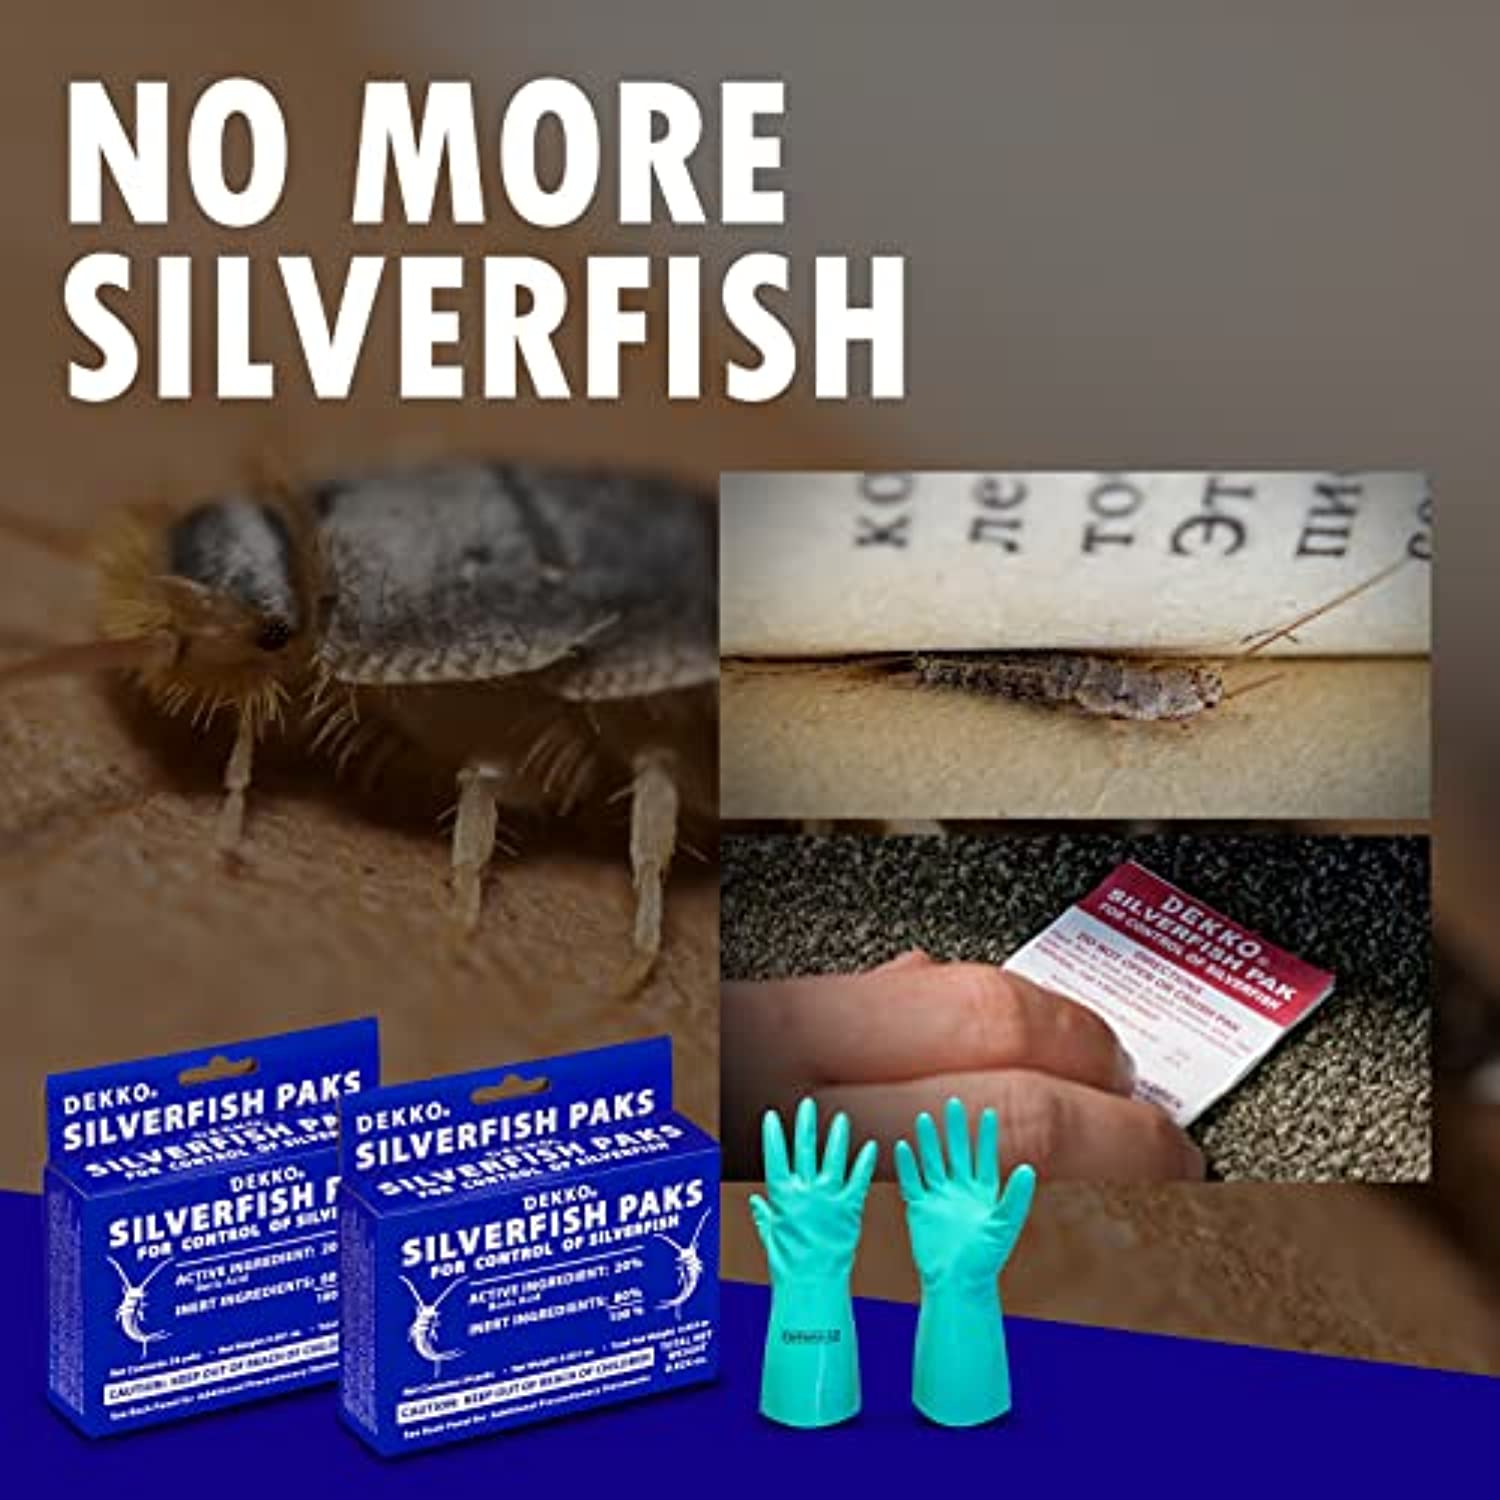 Dekko Silverfish Paks Perfect Indoor and Outdoor Household Solution Eco friendly Available with Premium Quality Centaurus AZ Gloves-Pack of 2